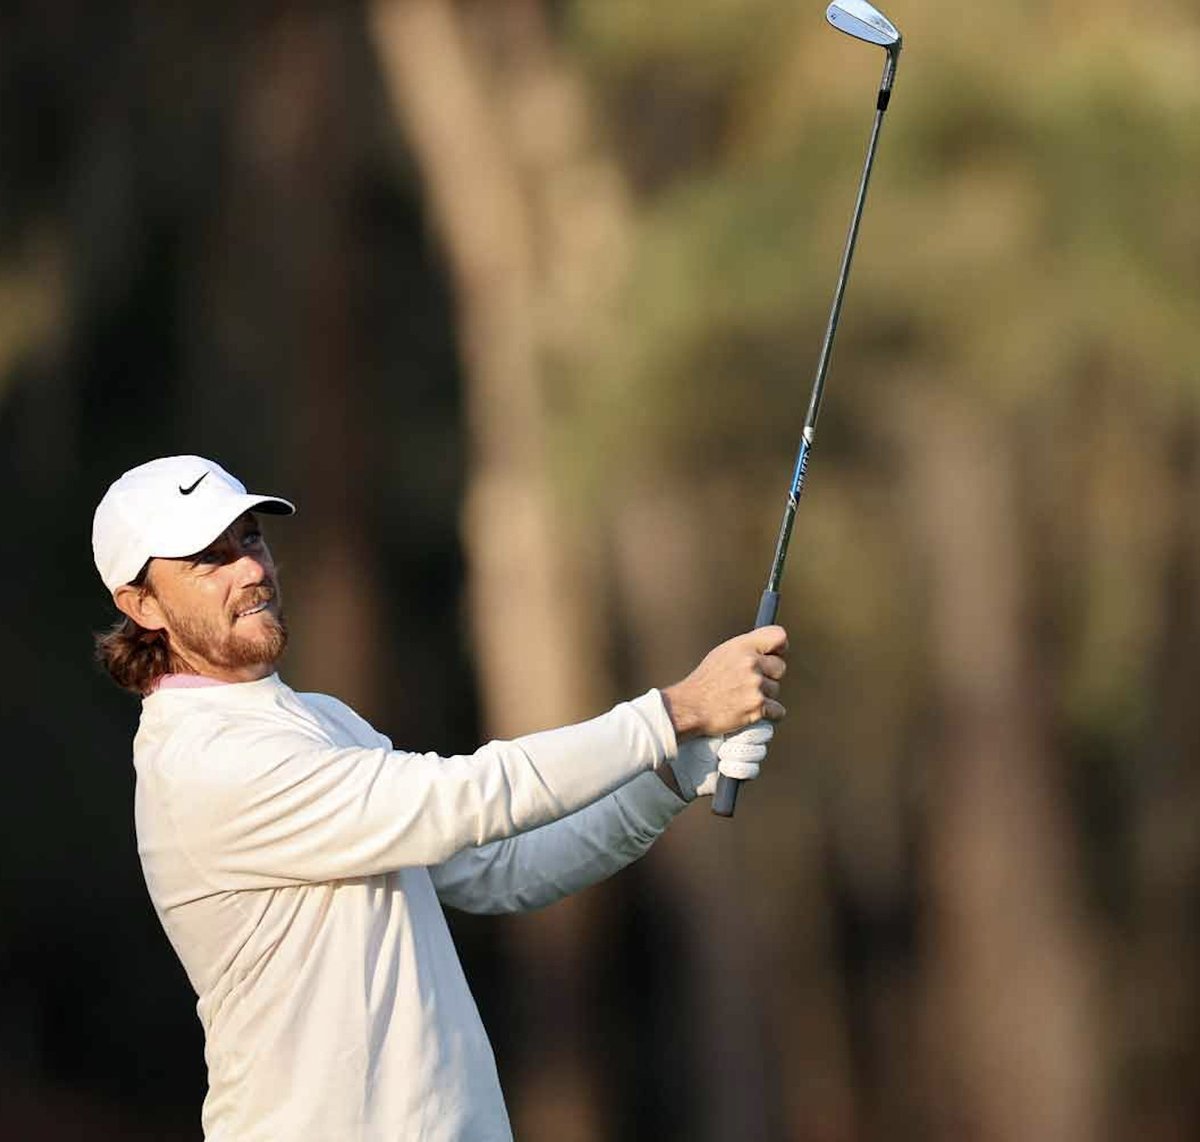 Tommy Fleetwood's easy drill for maintaining swing balance!🏌️

More: golflynk.com/news/tommy-fle…
-
-
-
#golf #golfing #tommyfleetwood #golfer #golfcourse #golflife #golfswing #golflynk #golfcart #golftournament #golfchannel #golfpro